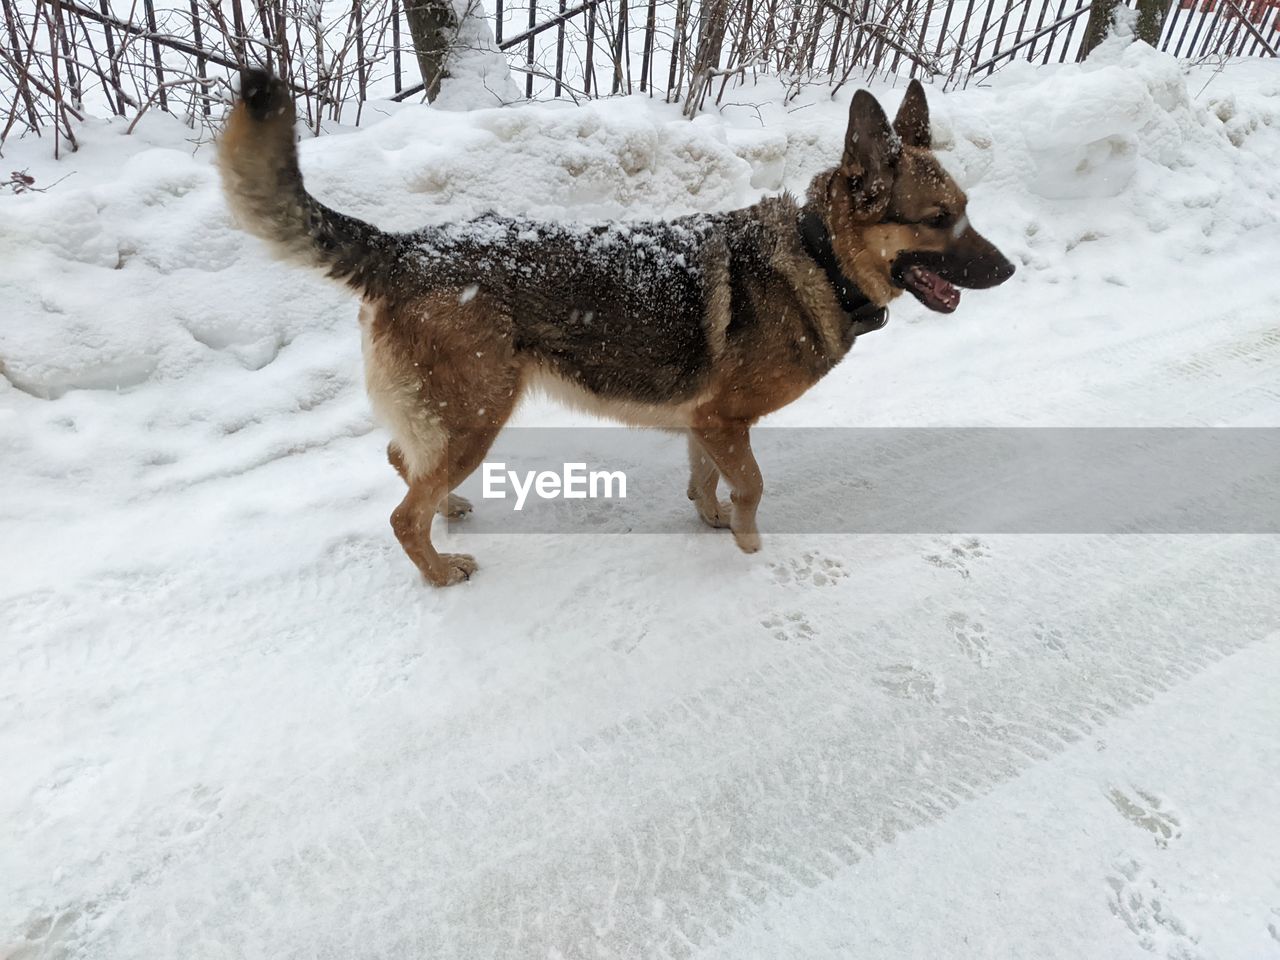 animal themes, animal, one animal, mammal, pet, snow, domestic animals, cold temperature, winter, dog, canine, nature, running, land, no people, german shepherd, frozen, walking, day, outdoors, environment, white